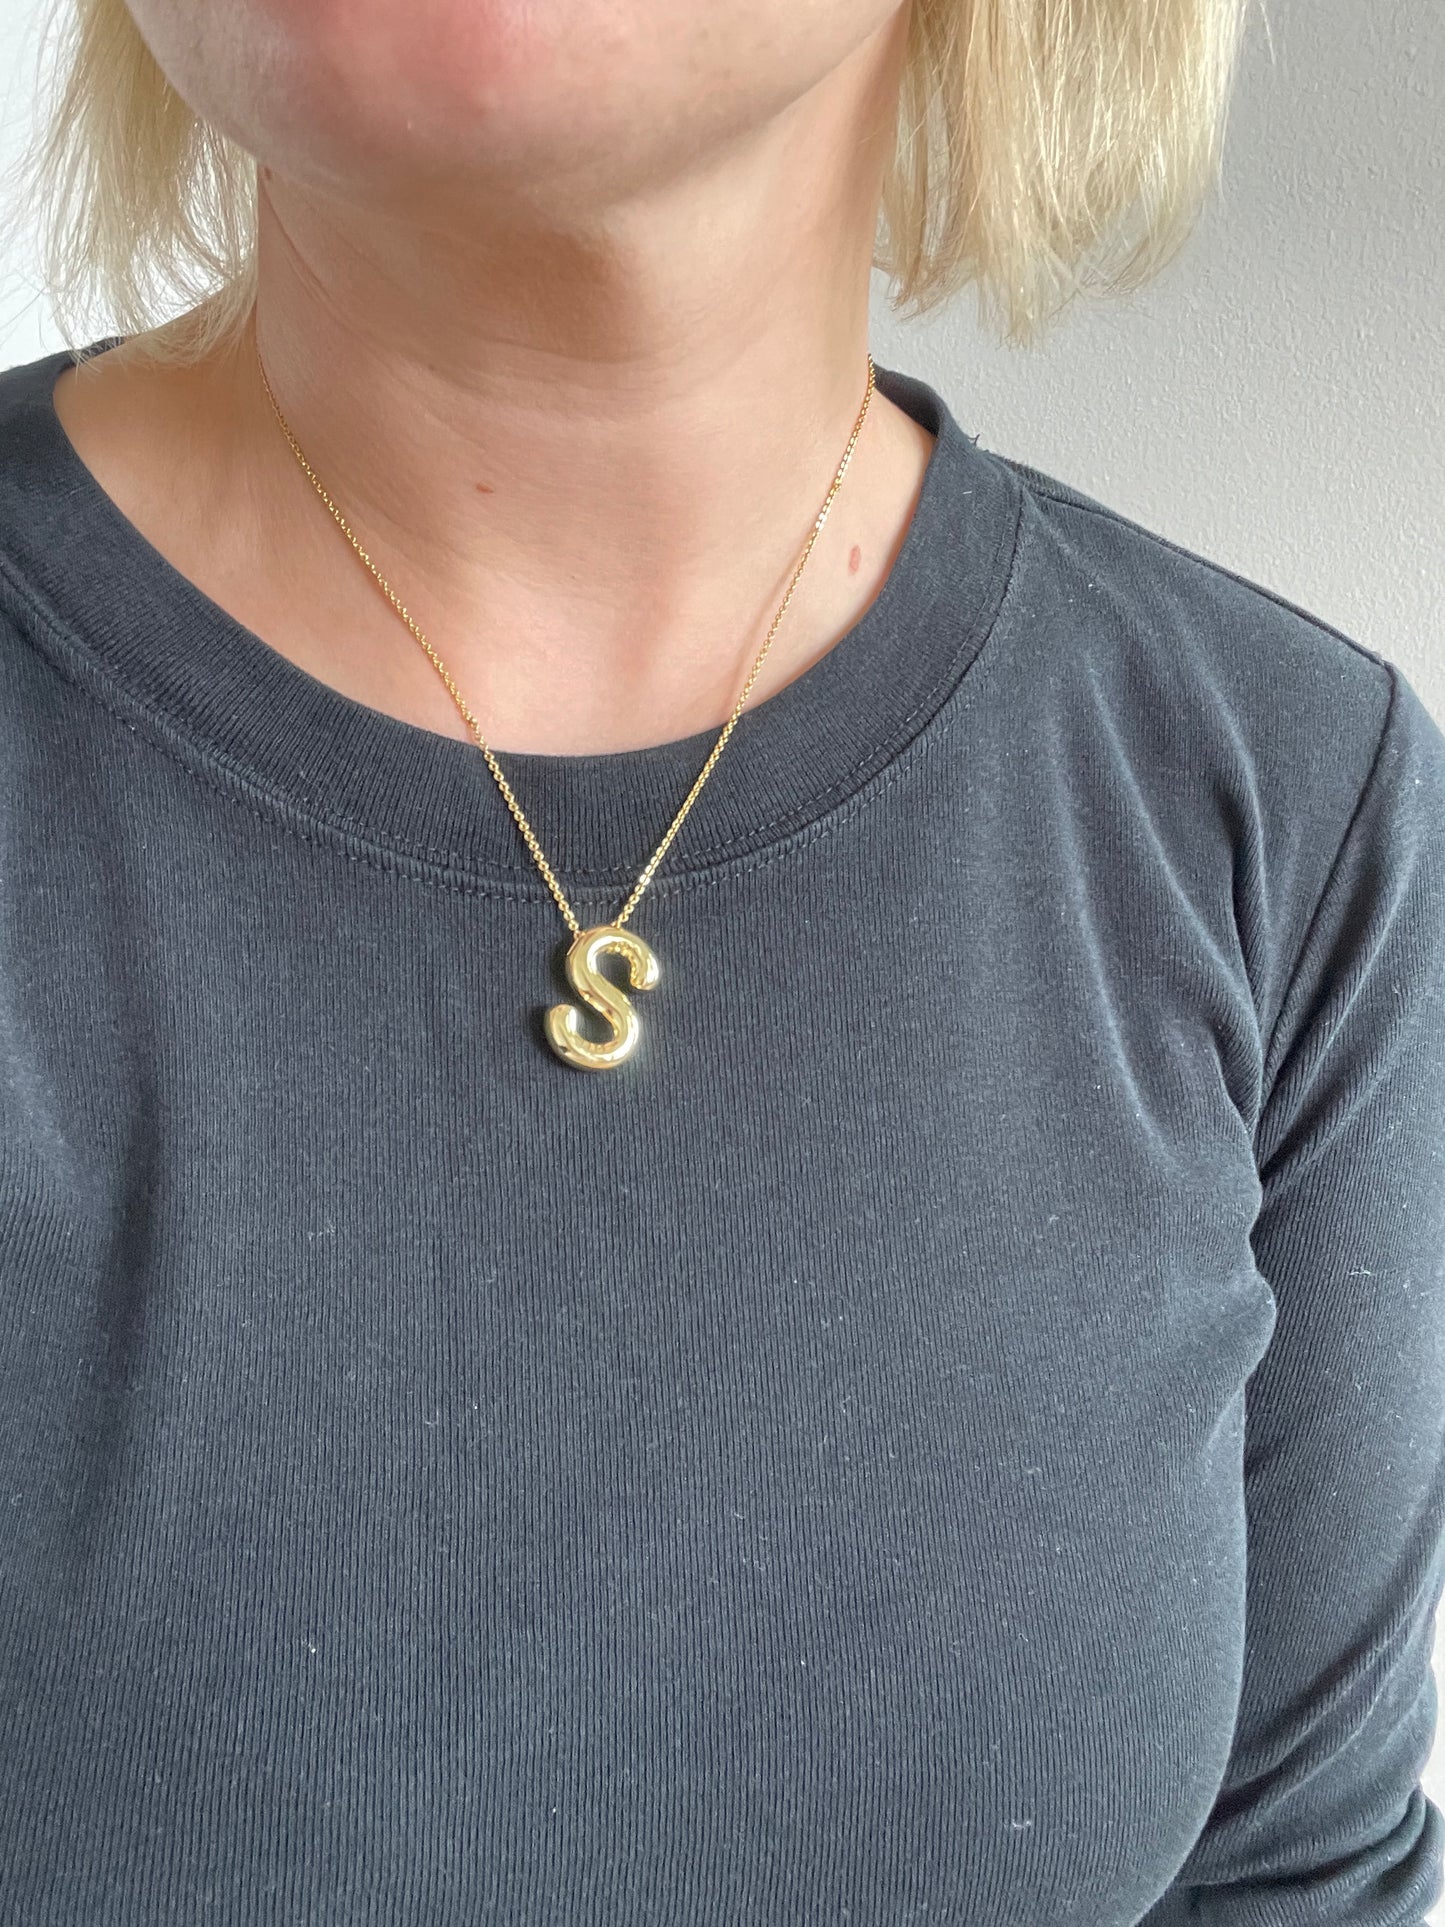 Balloon Initial Necklaces